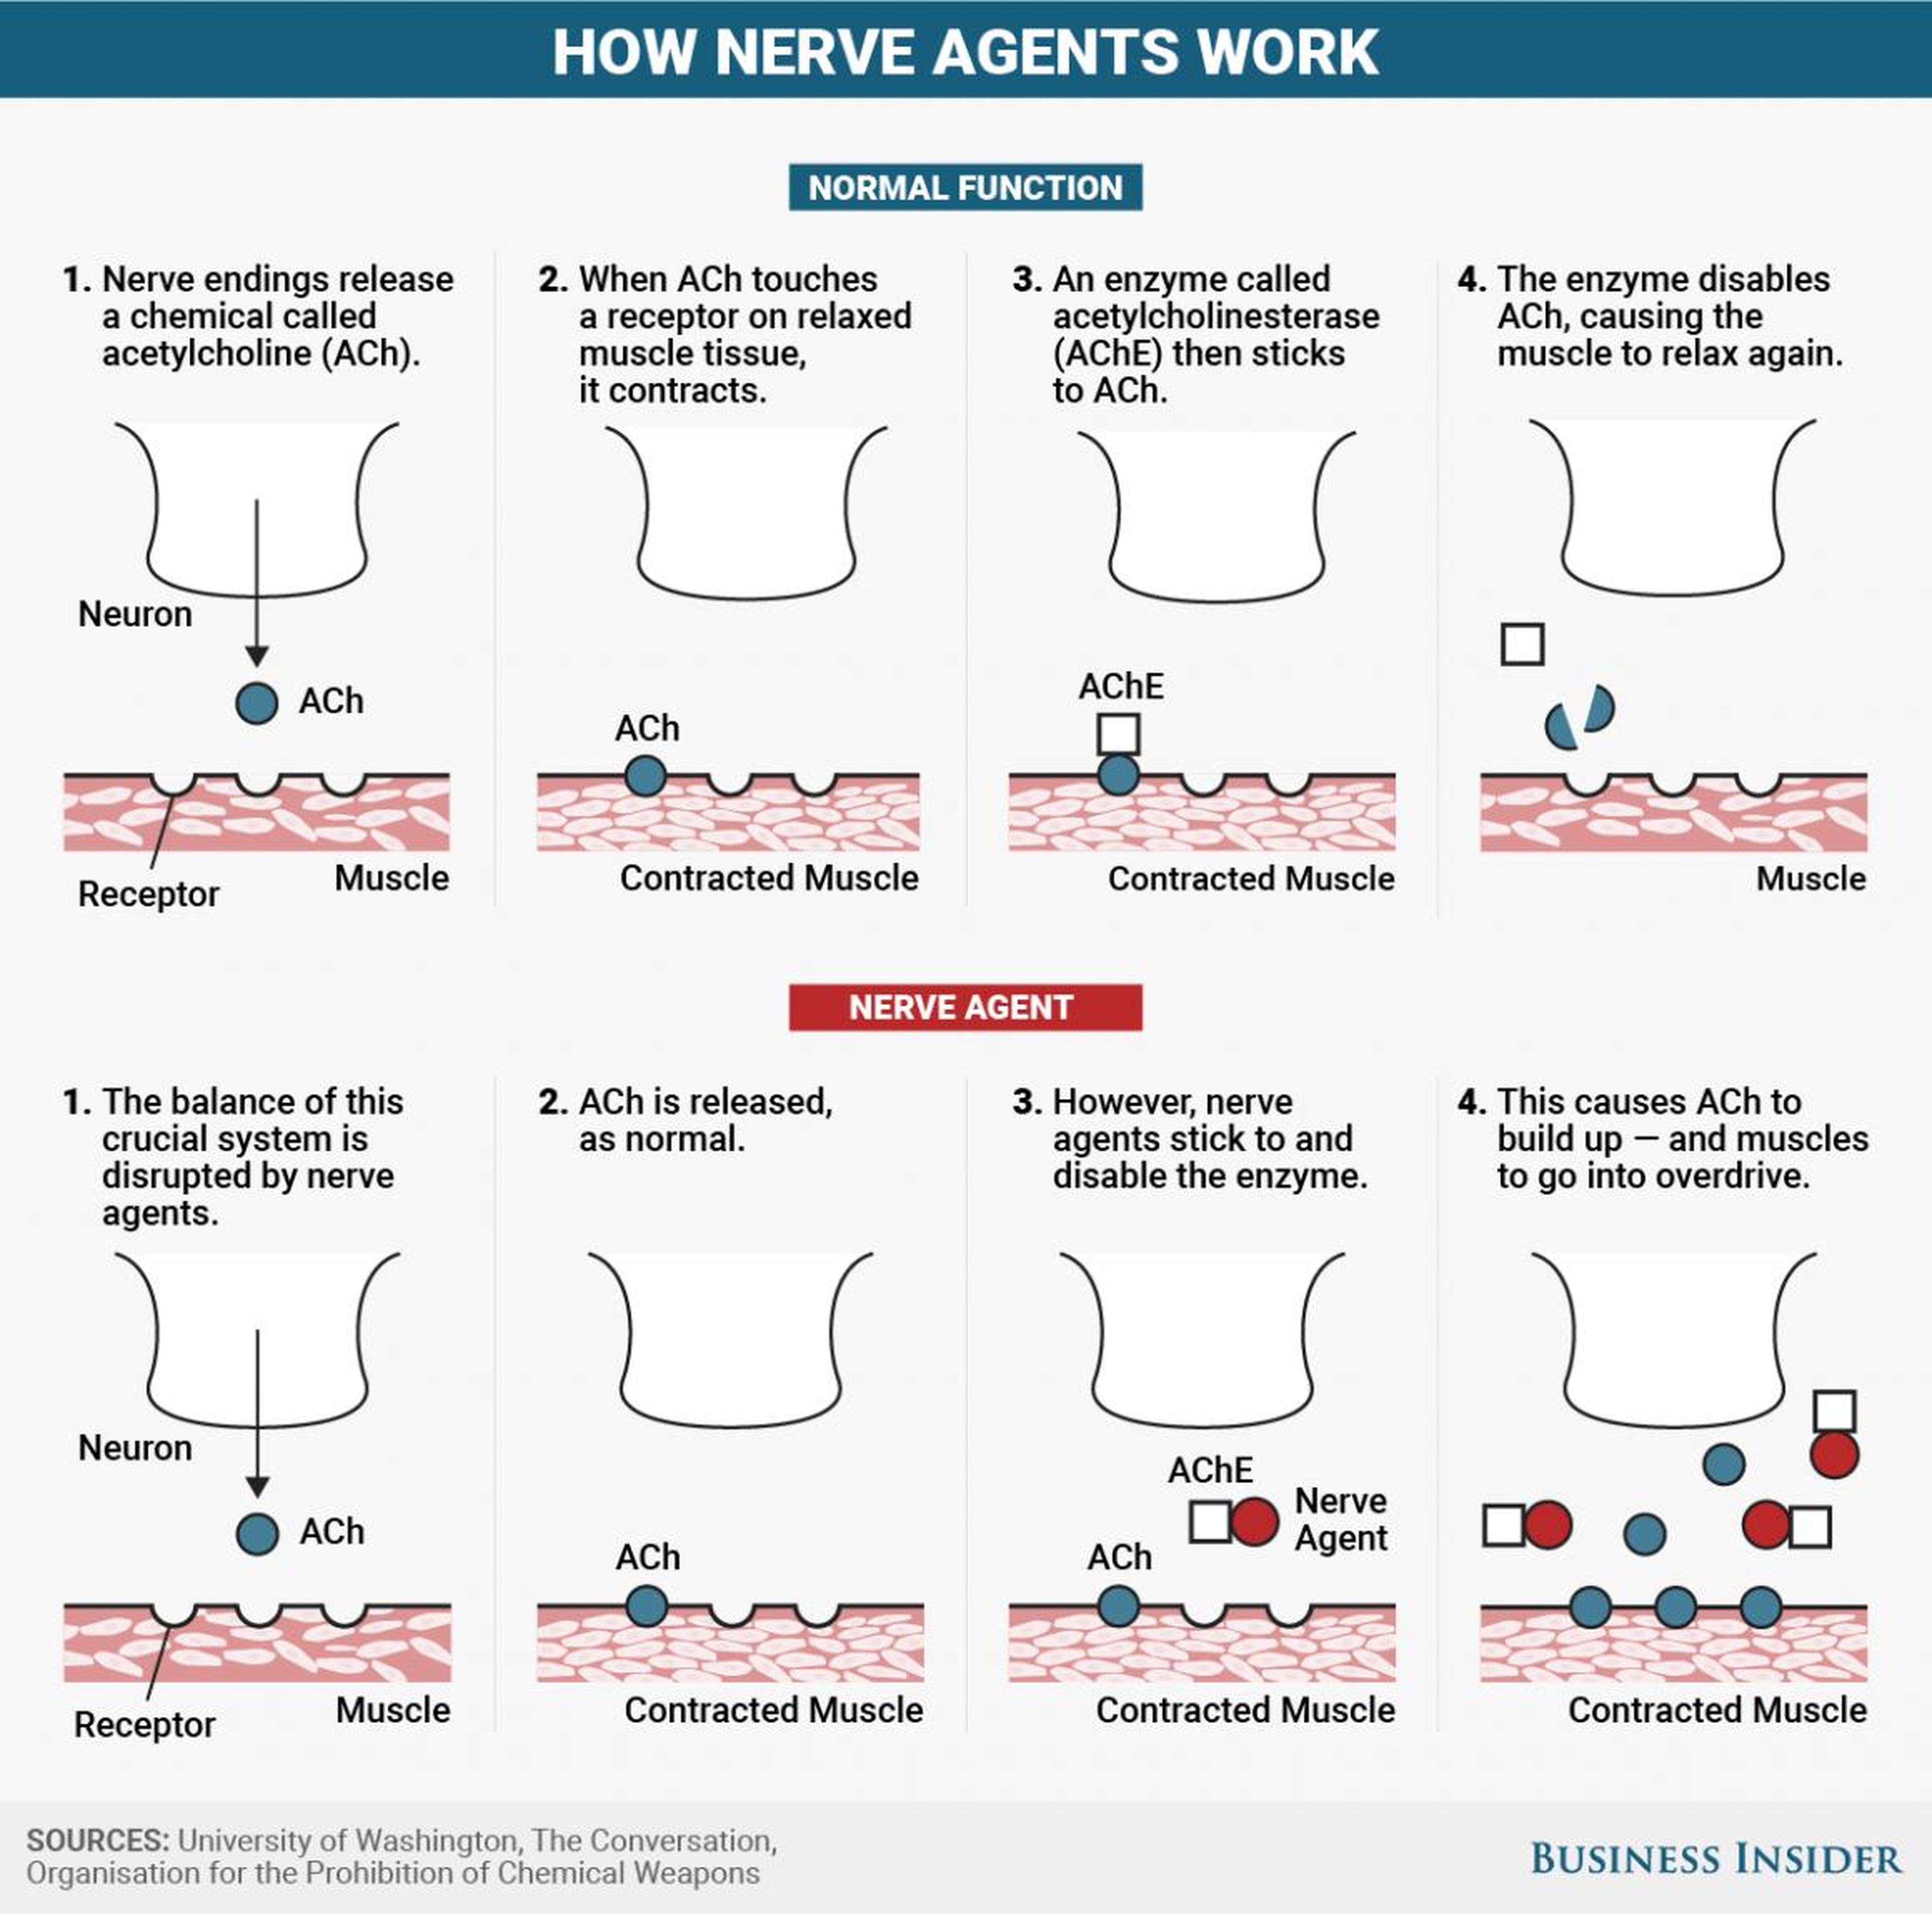 Nerve agents like tabun, sarin, soman, GF, and VX all target the connections between nerves and muscles.